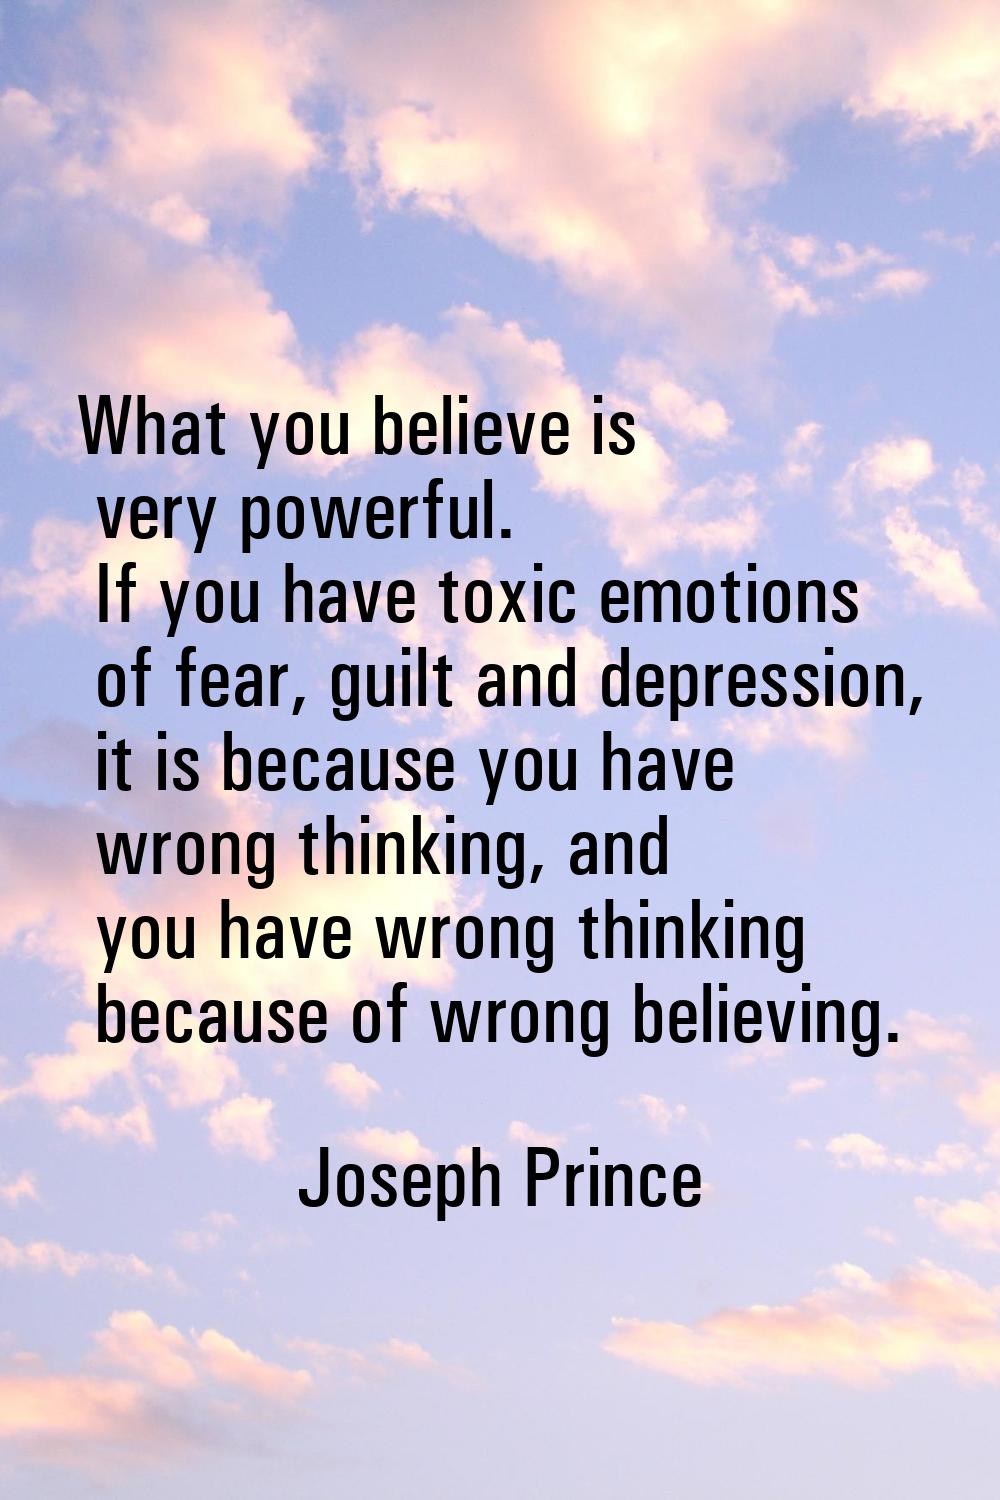 What you believe is very powerful. If you have toxic emotions of fear, guilt and depression, it is 